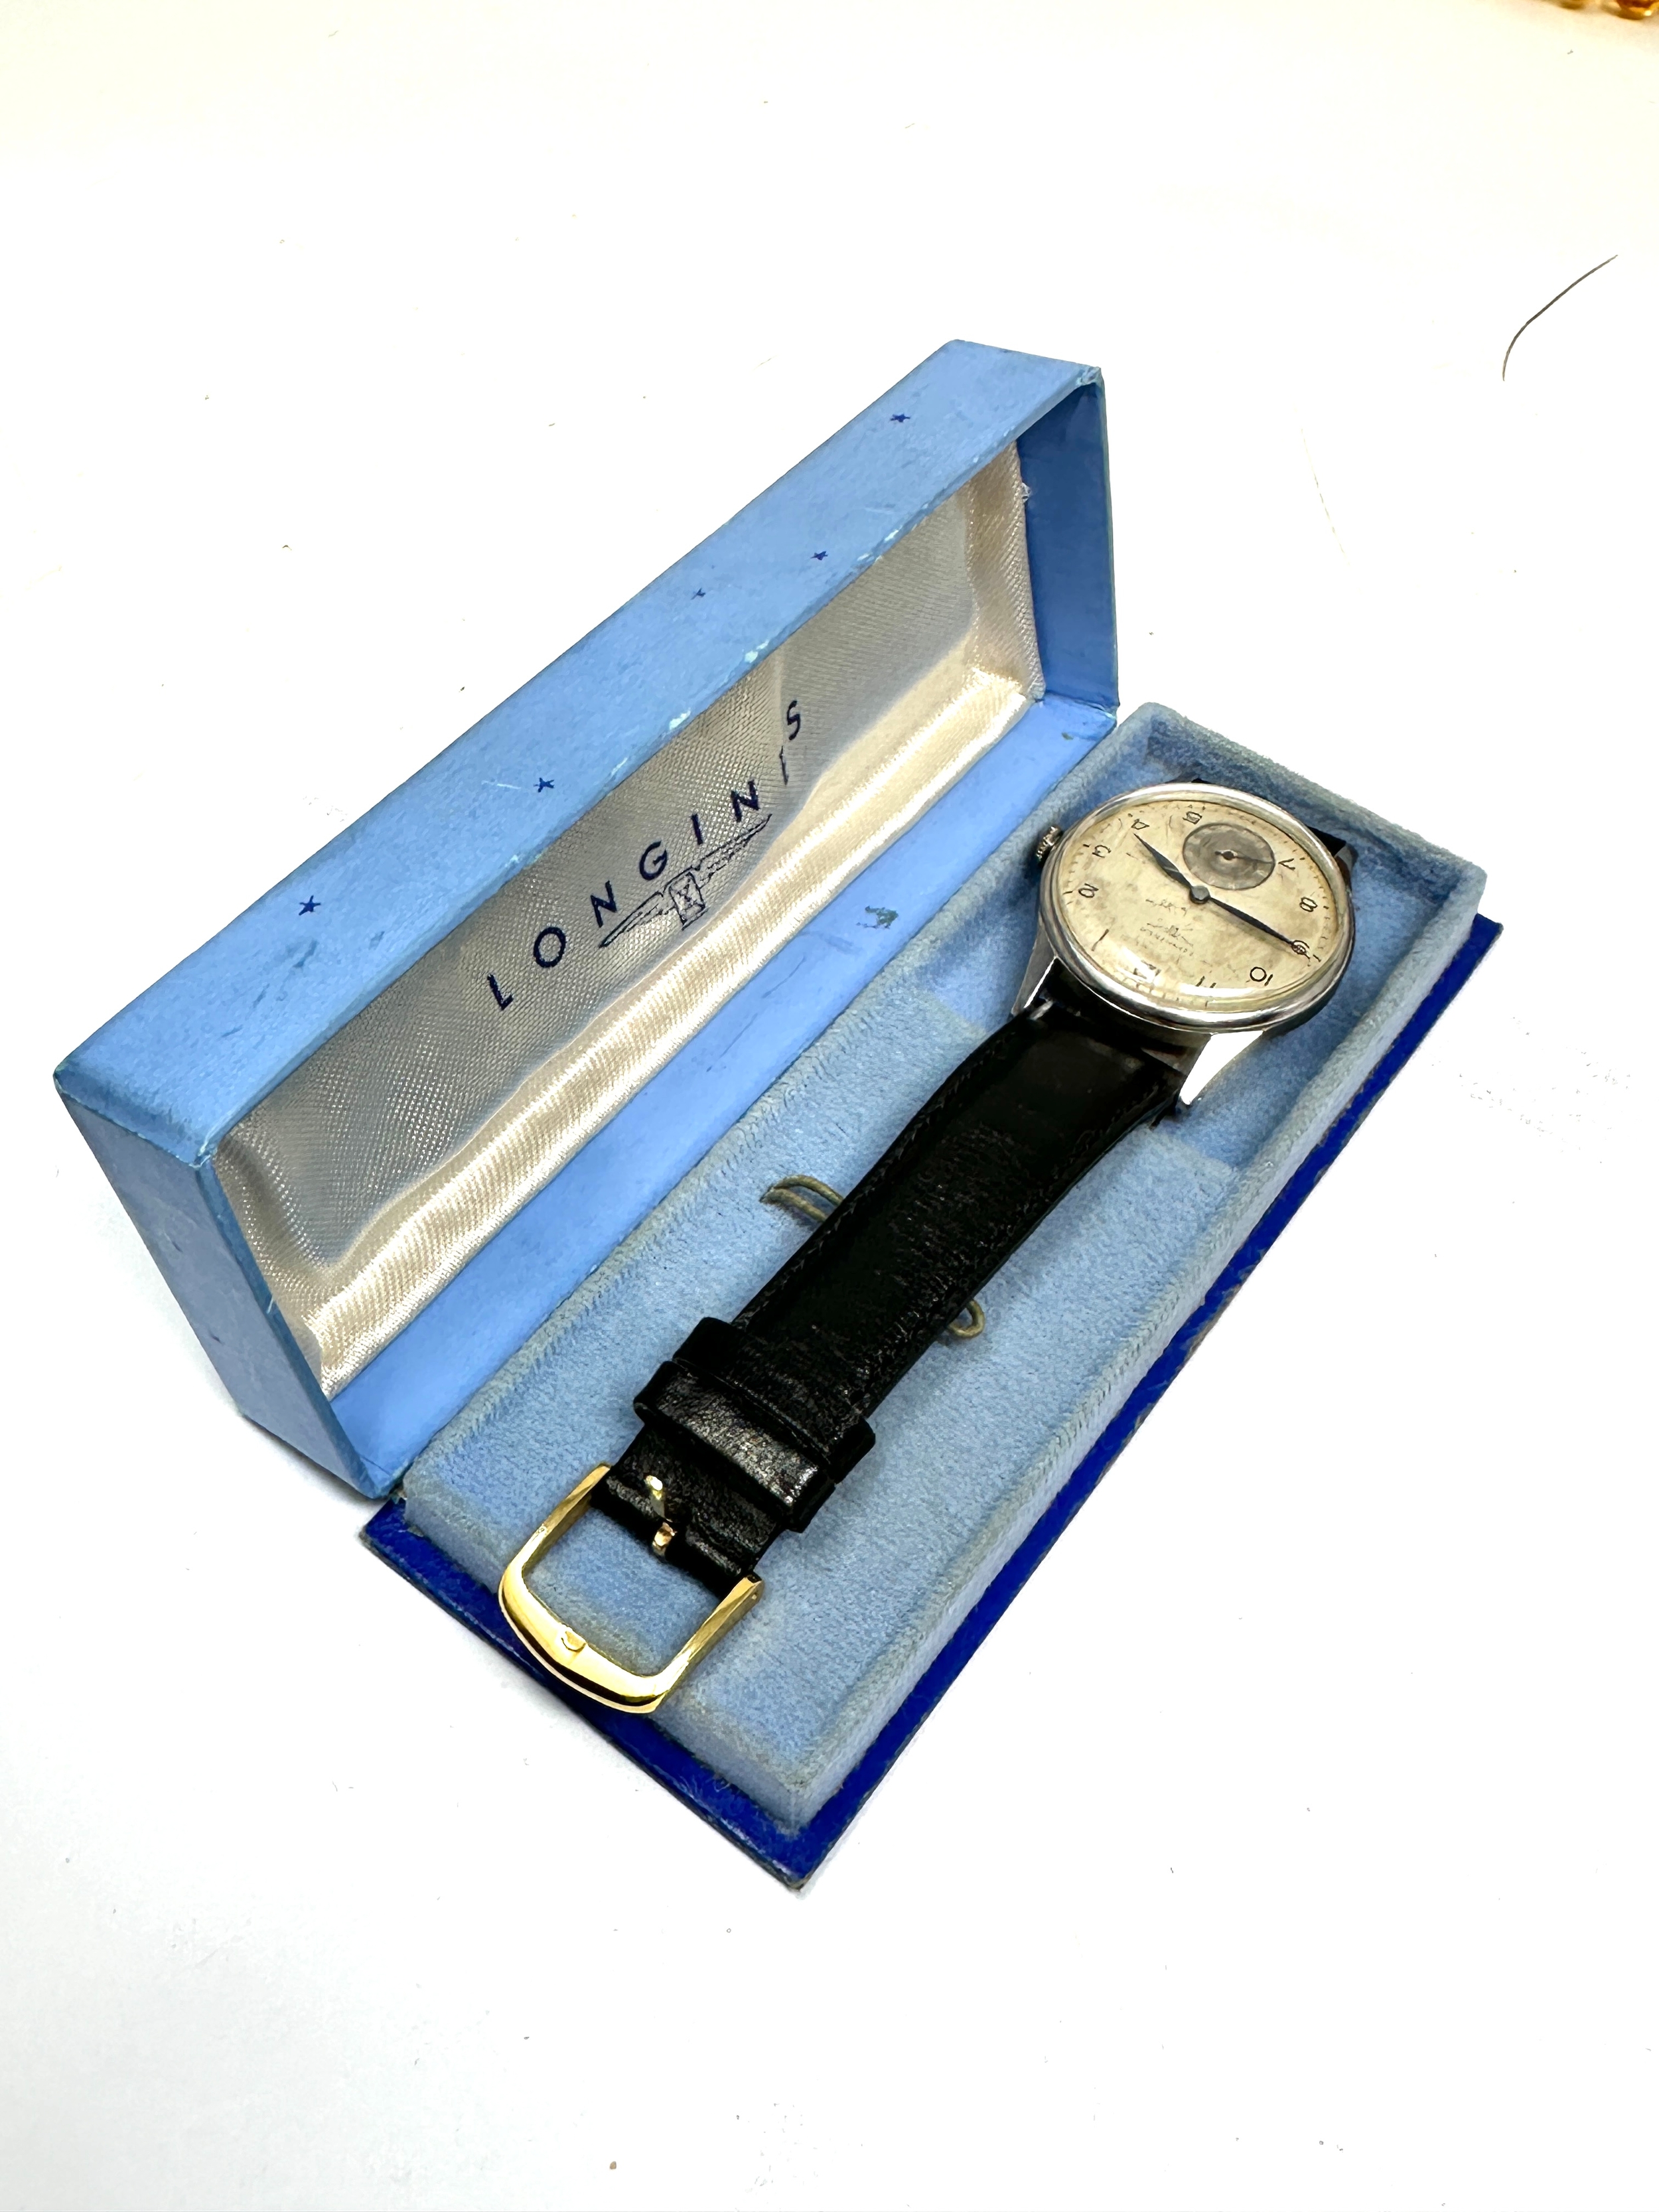 Original boxed vintage Longines gents wristwatch the watch is ticking - Image 4 of 4